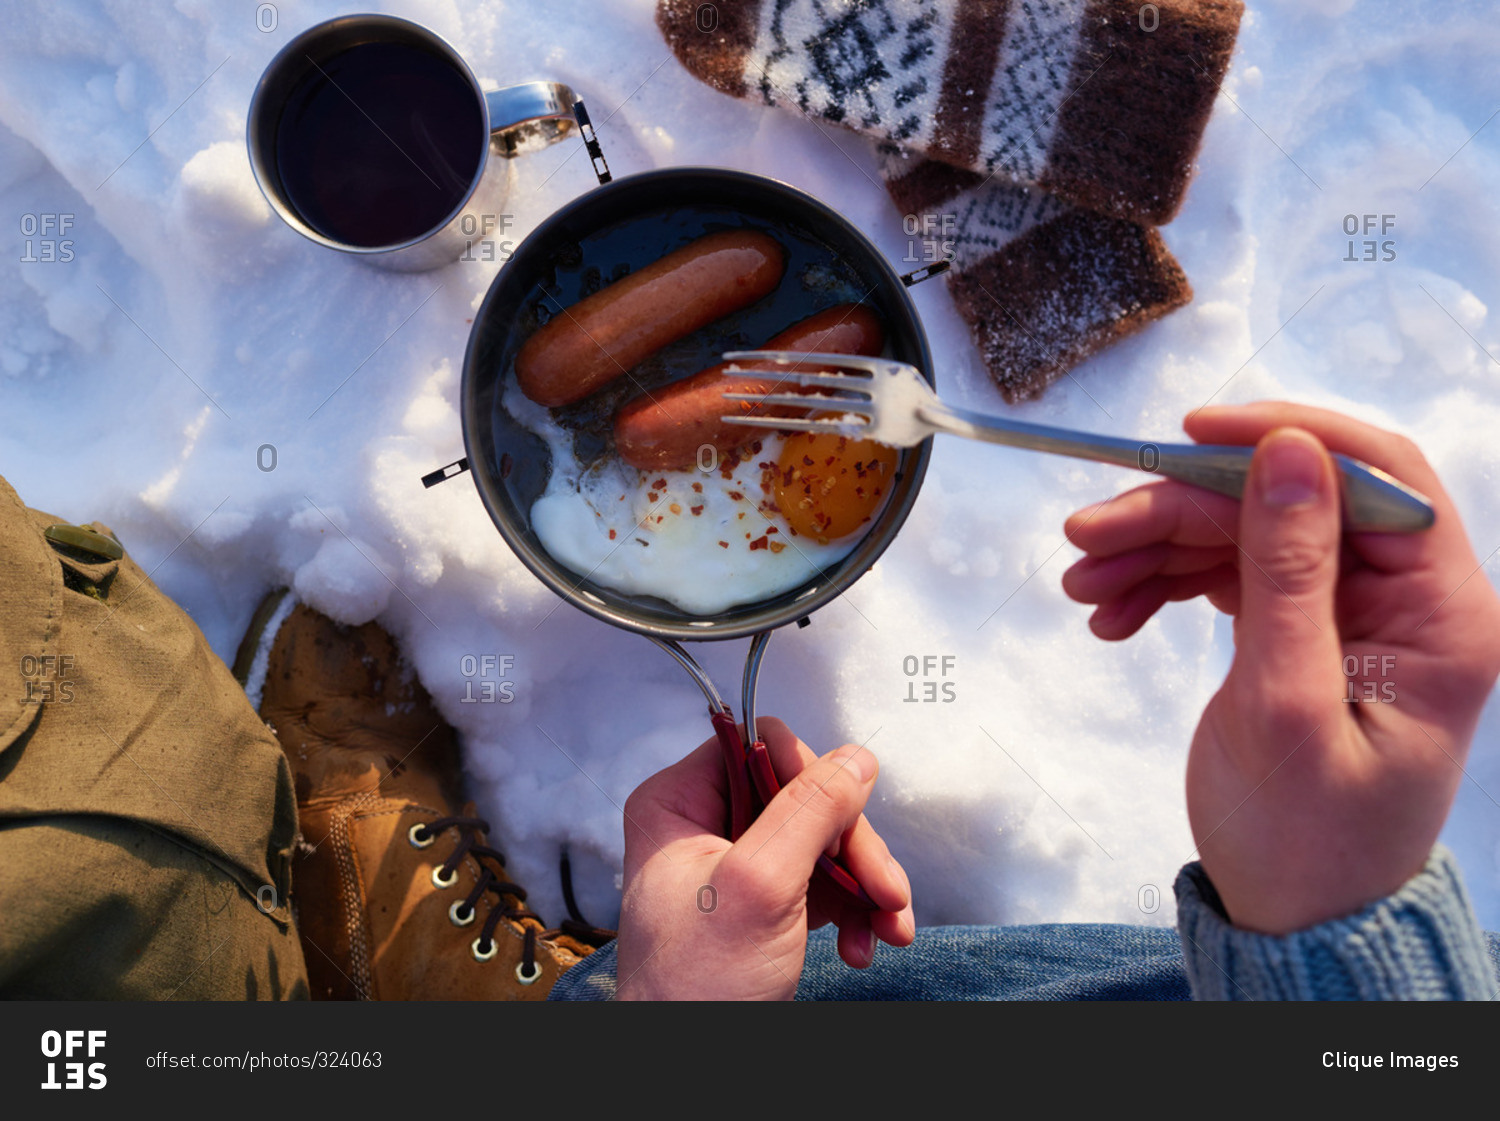 Man cooking sausages and eggs in the snow